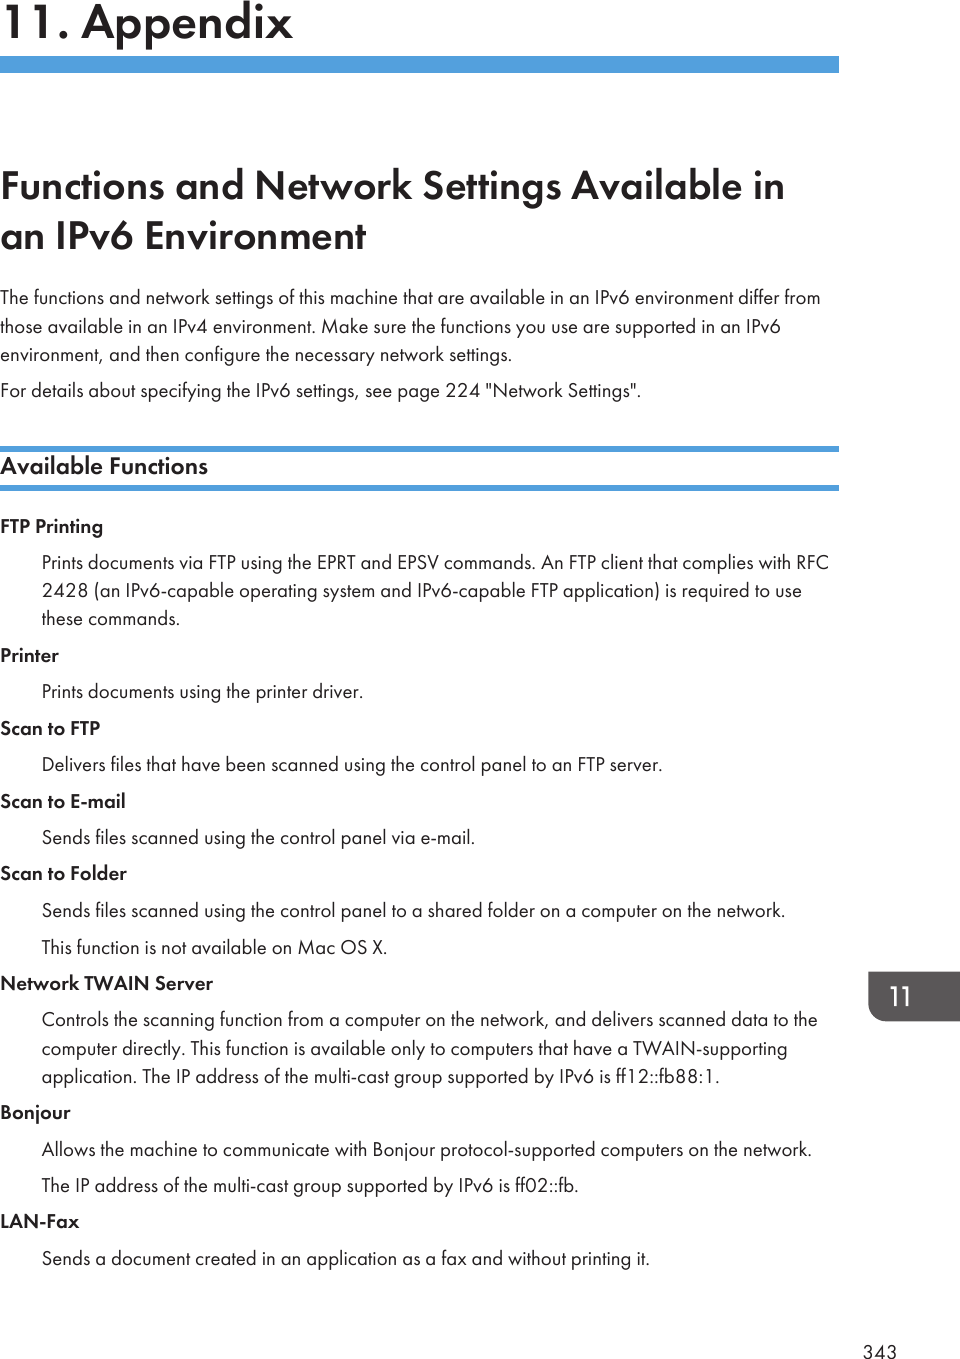 11. AppendixFunctions and Network Settings Available inan IPv6 EnvironmentThe functions and network settings of this machine that are available in an IPv6 environment differ fromthose available in an IPv4 environment. Make sure the functions you use are supported in an IPv6environment, and then configure the necessary network settings.For details about specifying the IPv6 settings, see page 224 &quot;Network Settings&quot;.Available FunctionsFTP PrintingPrints documents via FTP using the EPRT and EPSV commands. An FTP client that complies with RFC2428 (an IPv6-capable operating system and IPv6-capable FTP application) is required to usethese commands.PrinterPrints documents using the printer driver.Scan to FTPDelivers files that have been scanned using the control panel to an FTP server.Scan to E-mailSends files scanned using the control panel via e-mail.Scan to FolderSends files scanned using the control panel to a shared folder on a computer on the network.This function is not available on Mac OS X.Network TWAIN ServerControls the scanning function from a computer on the network, and delivers scanned data to thecomputer directly. This function is available only to computers that have a TWAIN-supportingapplication. The IP address of the multi-cast group supported by IPv6 is ff12::fb88:1.BonjourAllows the machine to communicate with Bonjour protocol-supported computers on the network.The IP address of the multi-cast group supported by IPv6 is ff02::fb.LAN-FaxSends a document created in an application as a fax and without printing it.343